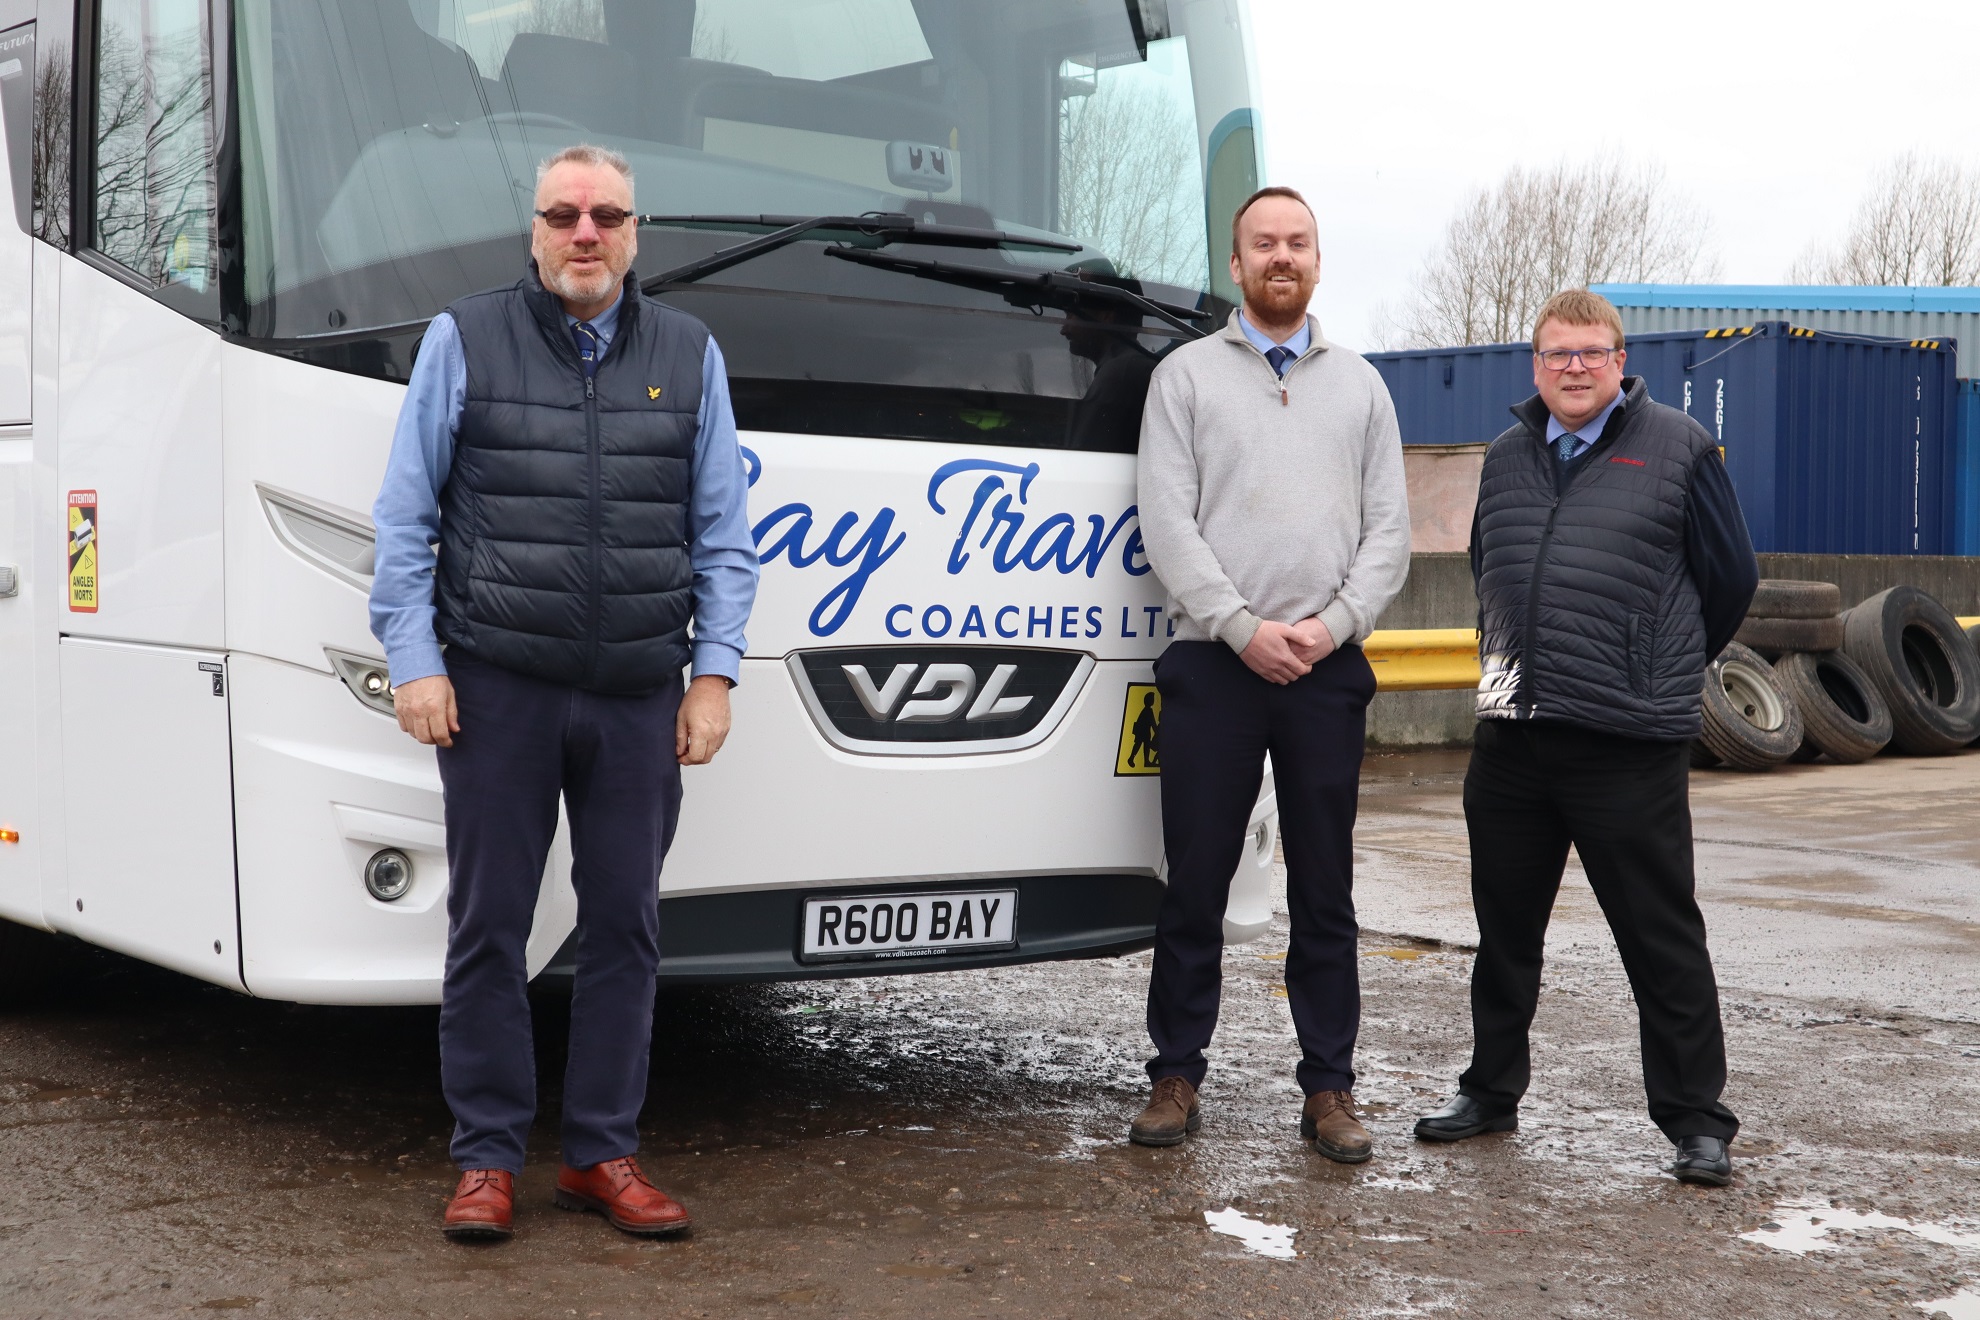 Bay Travel growing rapidly in Fife